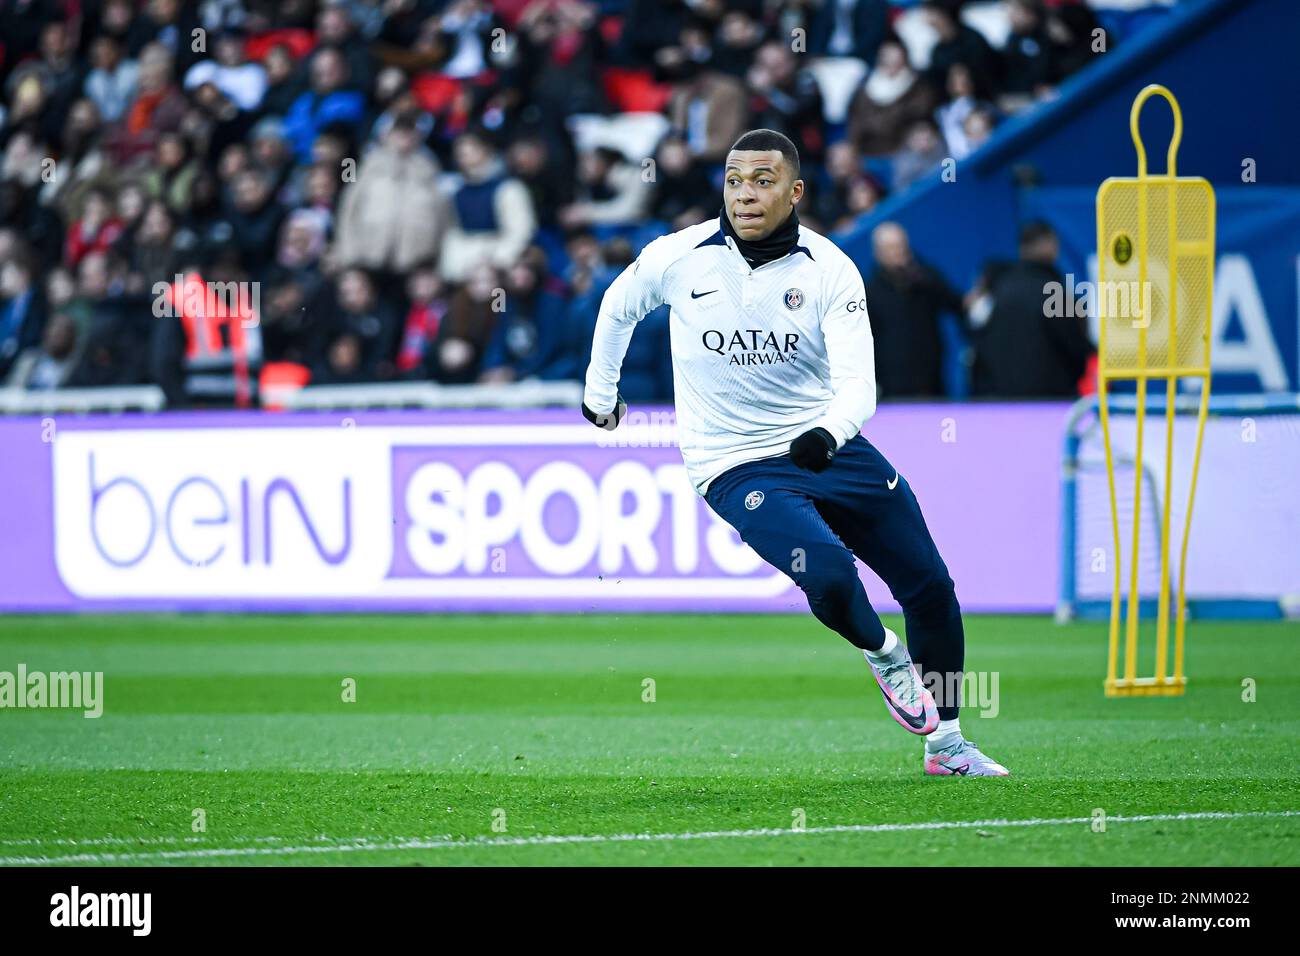 Kylian Mbappe during the public training of the Paris Saint-Germain (PSG) football team on February 24, 2023 at the Parc des Princes stadium in Paris, France. Photo by Victor Joly/ABACAPRESS.COM Stock Photo